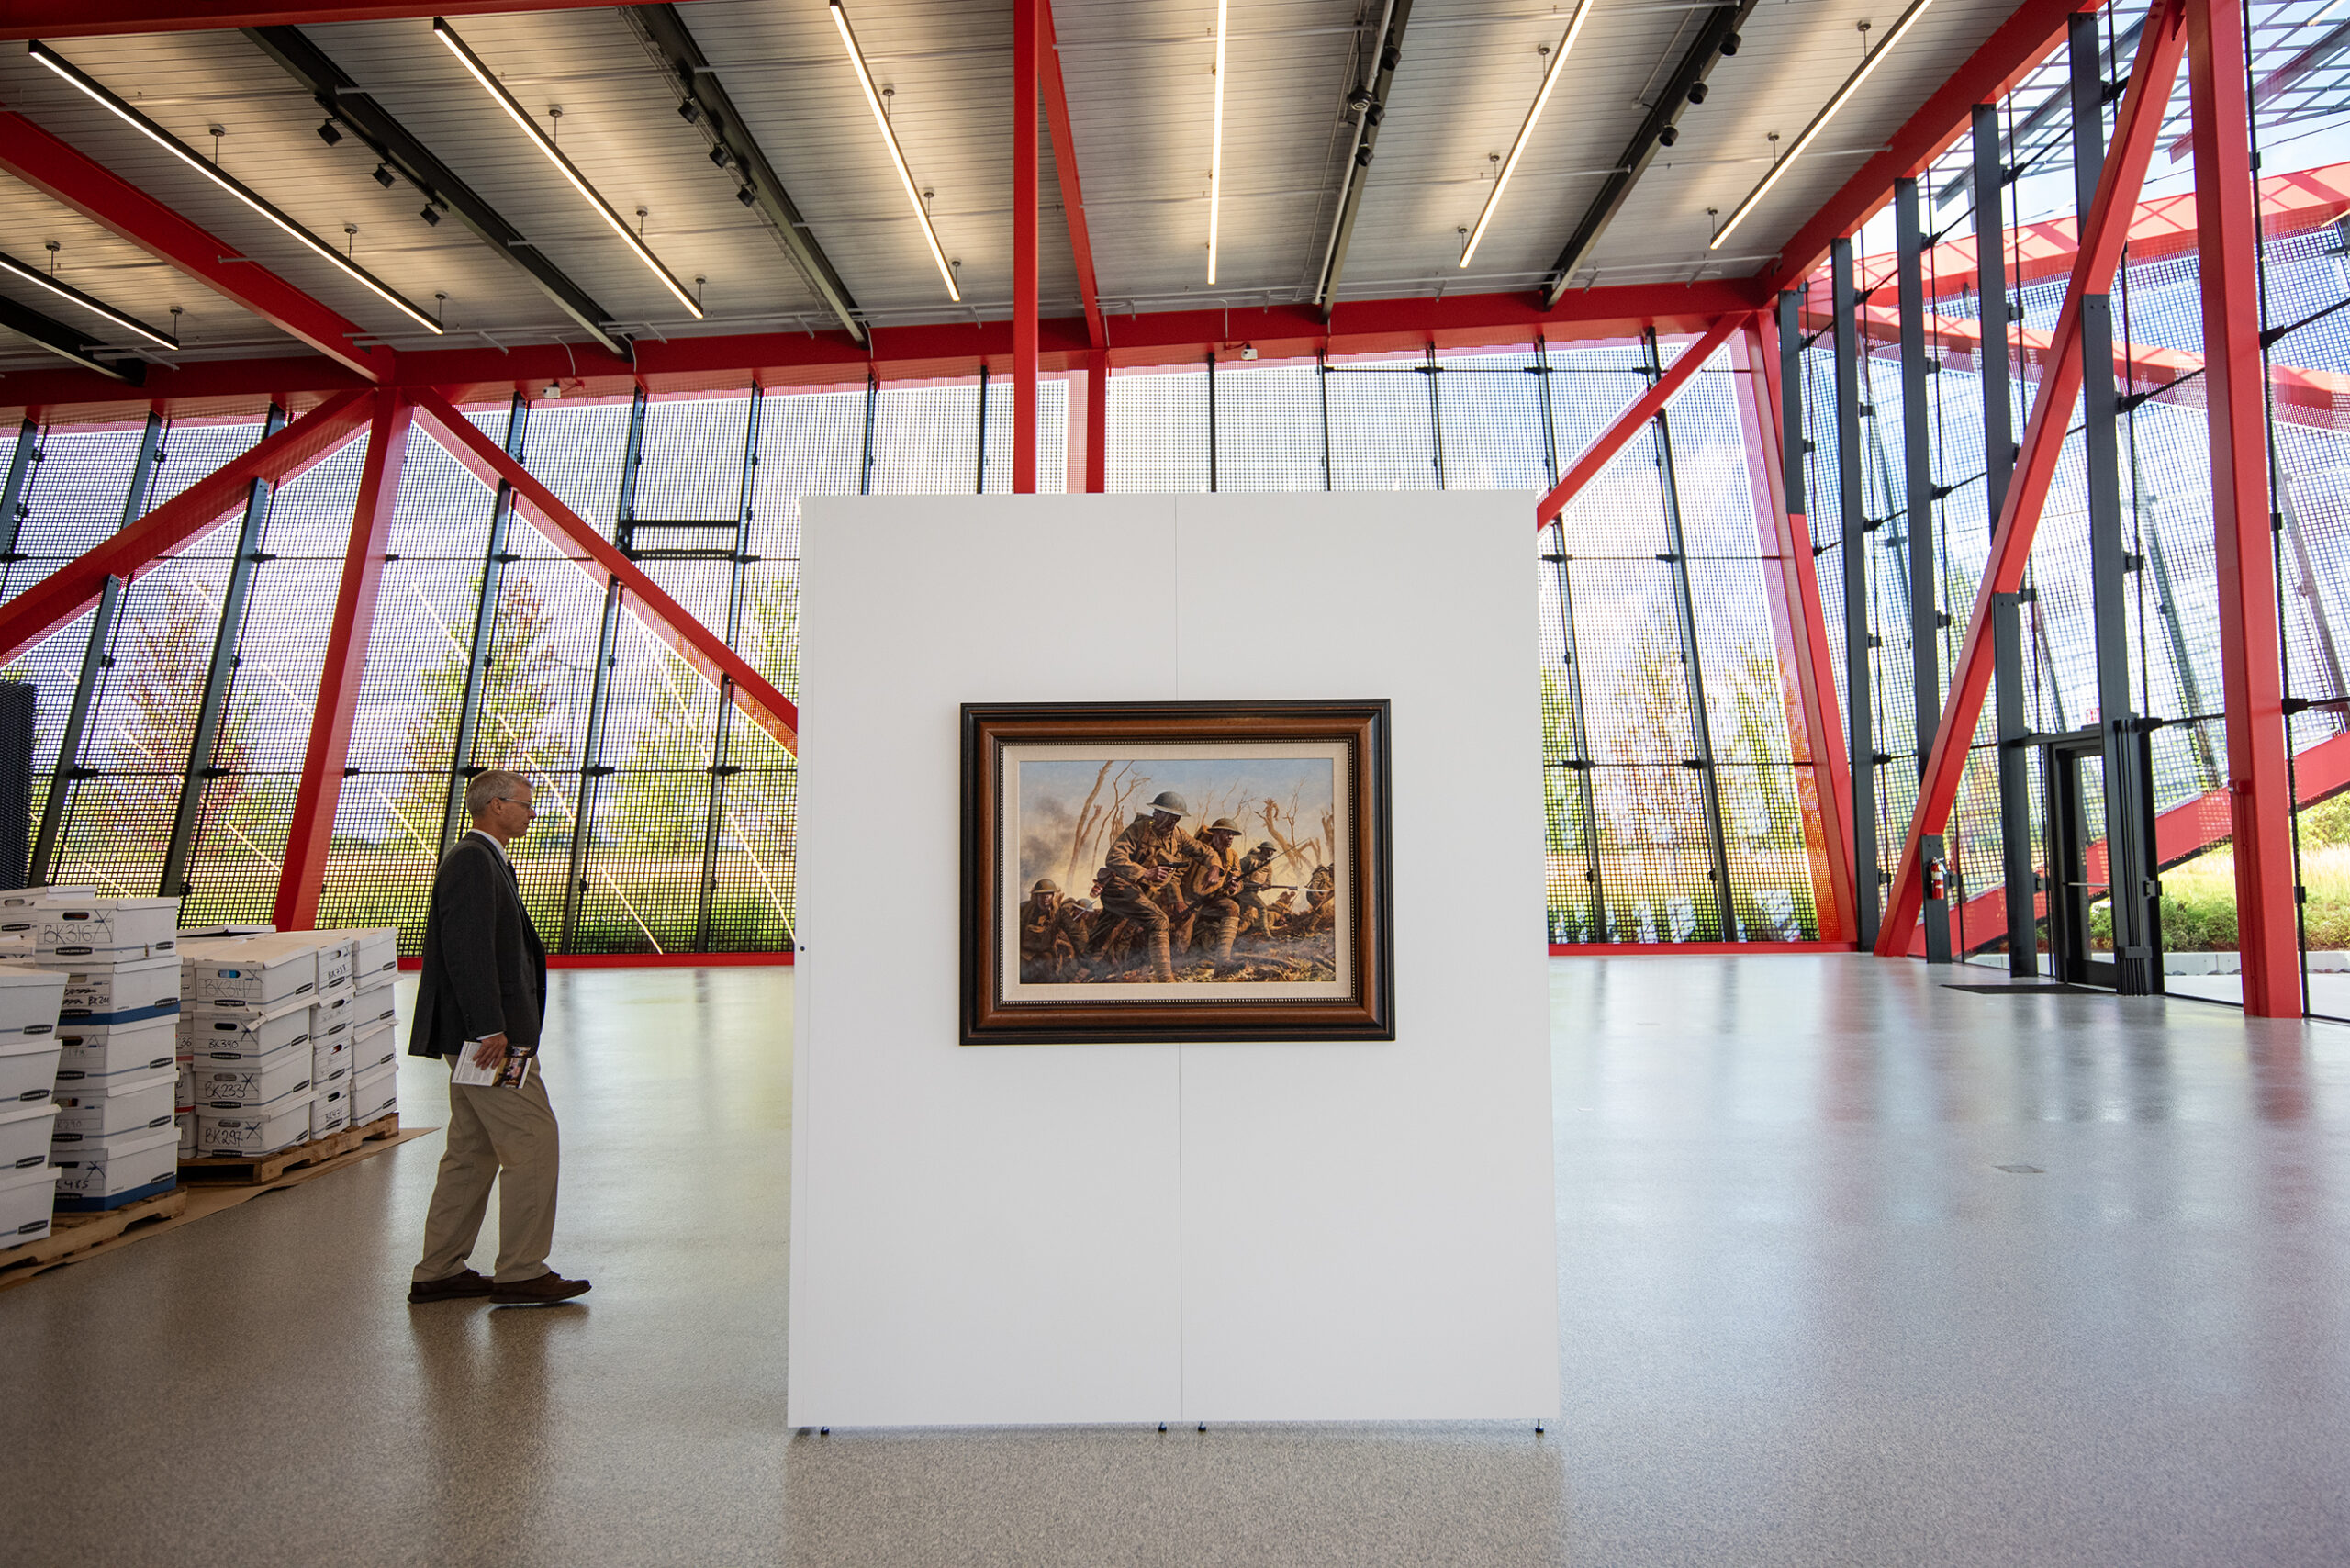 A framed piece hangs on a small white wall inside a large space. The building's red beams can be seen in the background.